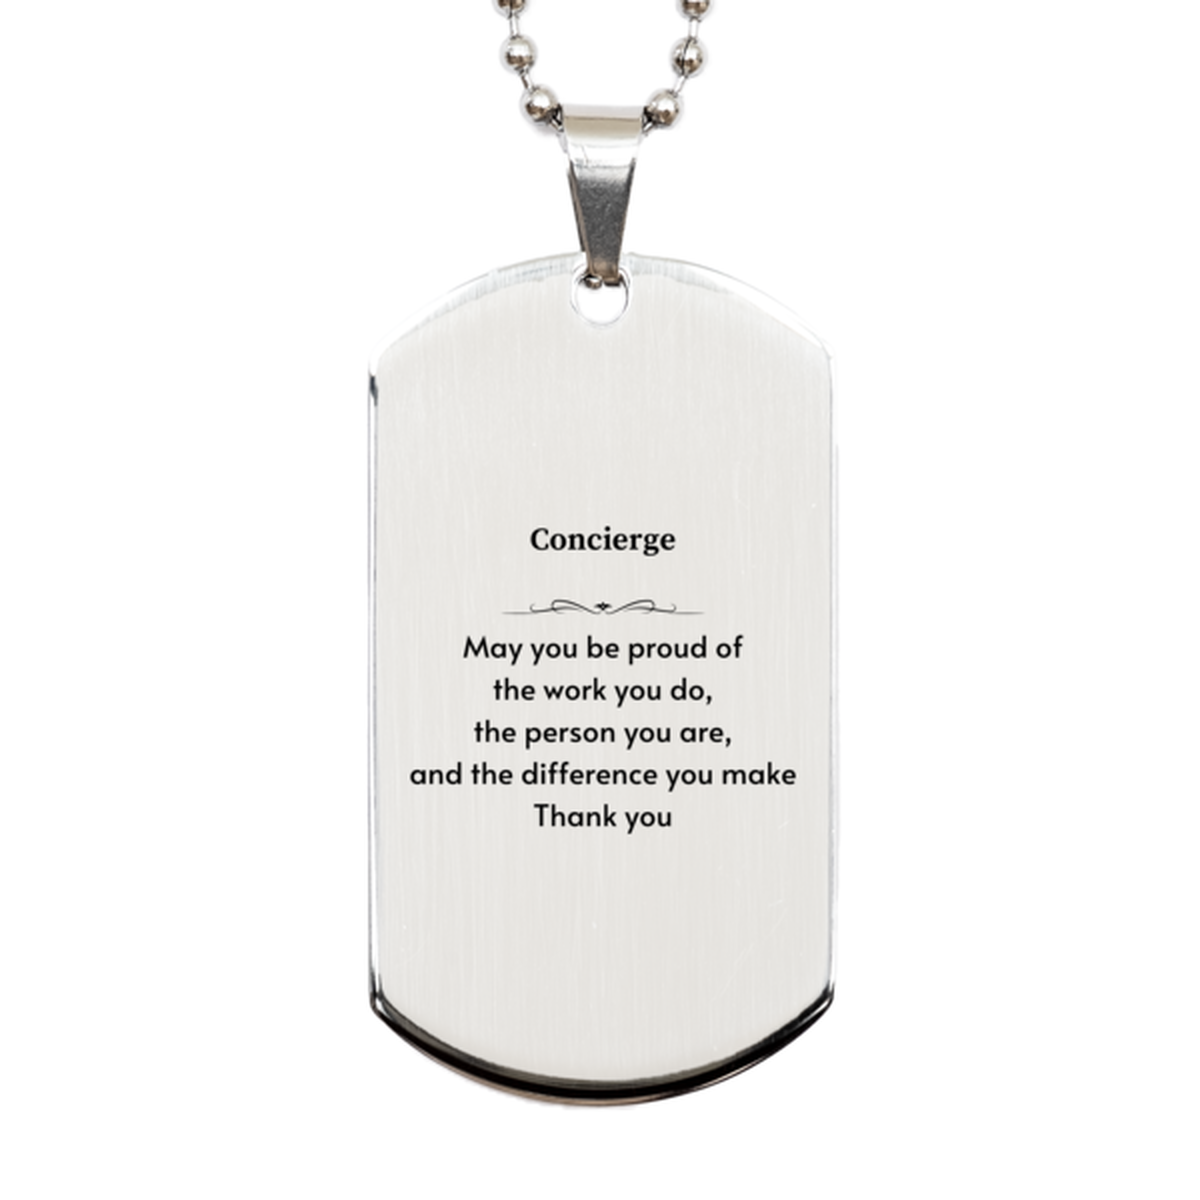 Heartwarming Silver Dog Tag Retirement Coworkers Gifts for Concierge, Concierge May You be proud of the work you do, the person you are Gifts for Boss Men Women Friends